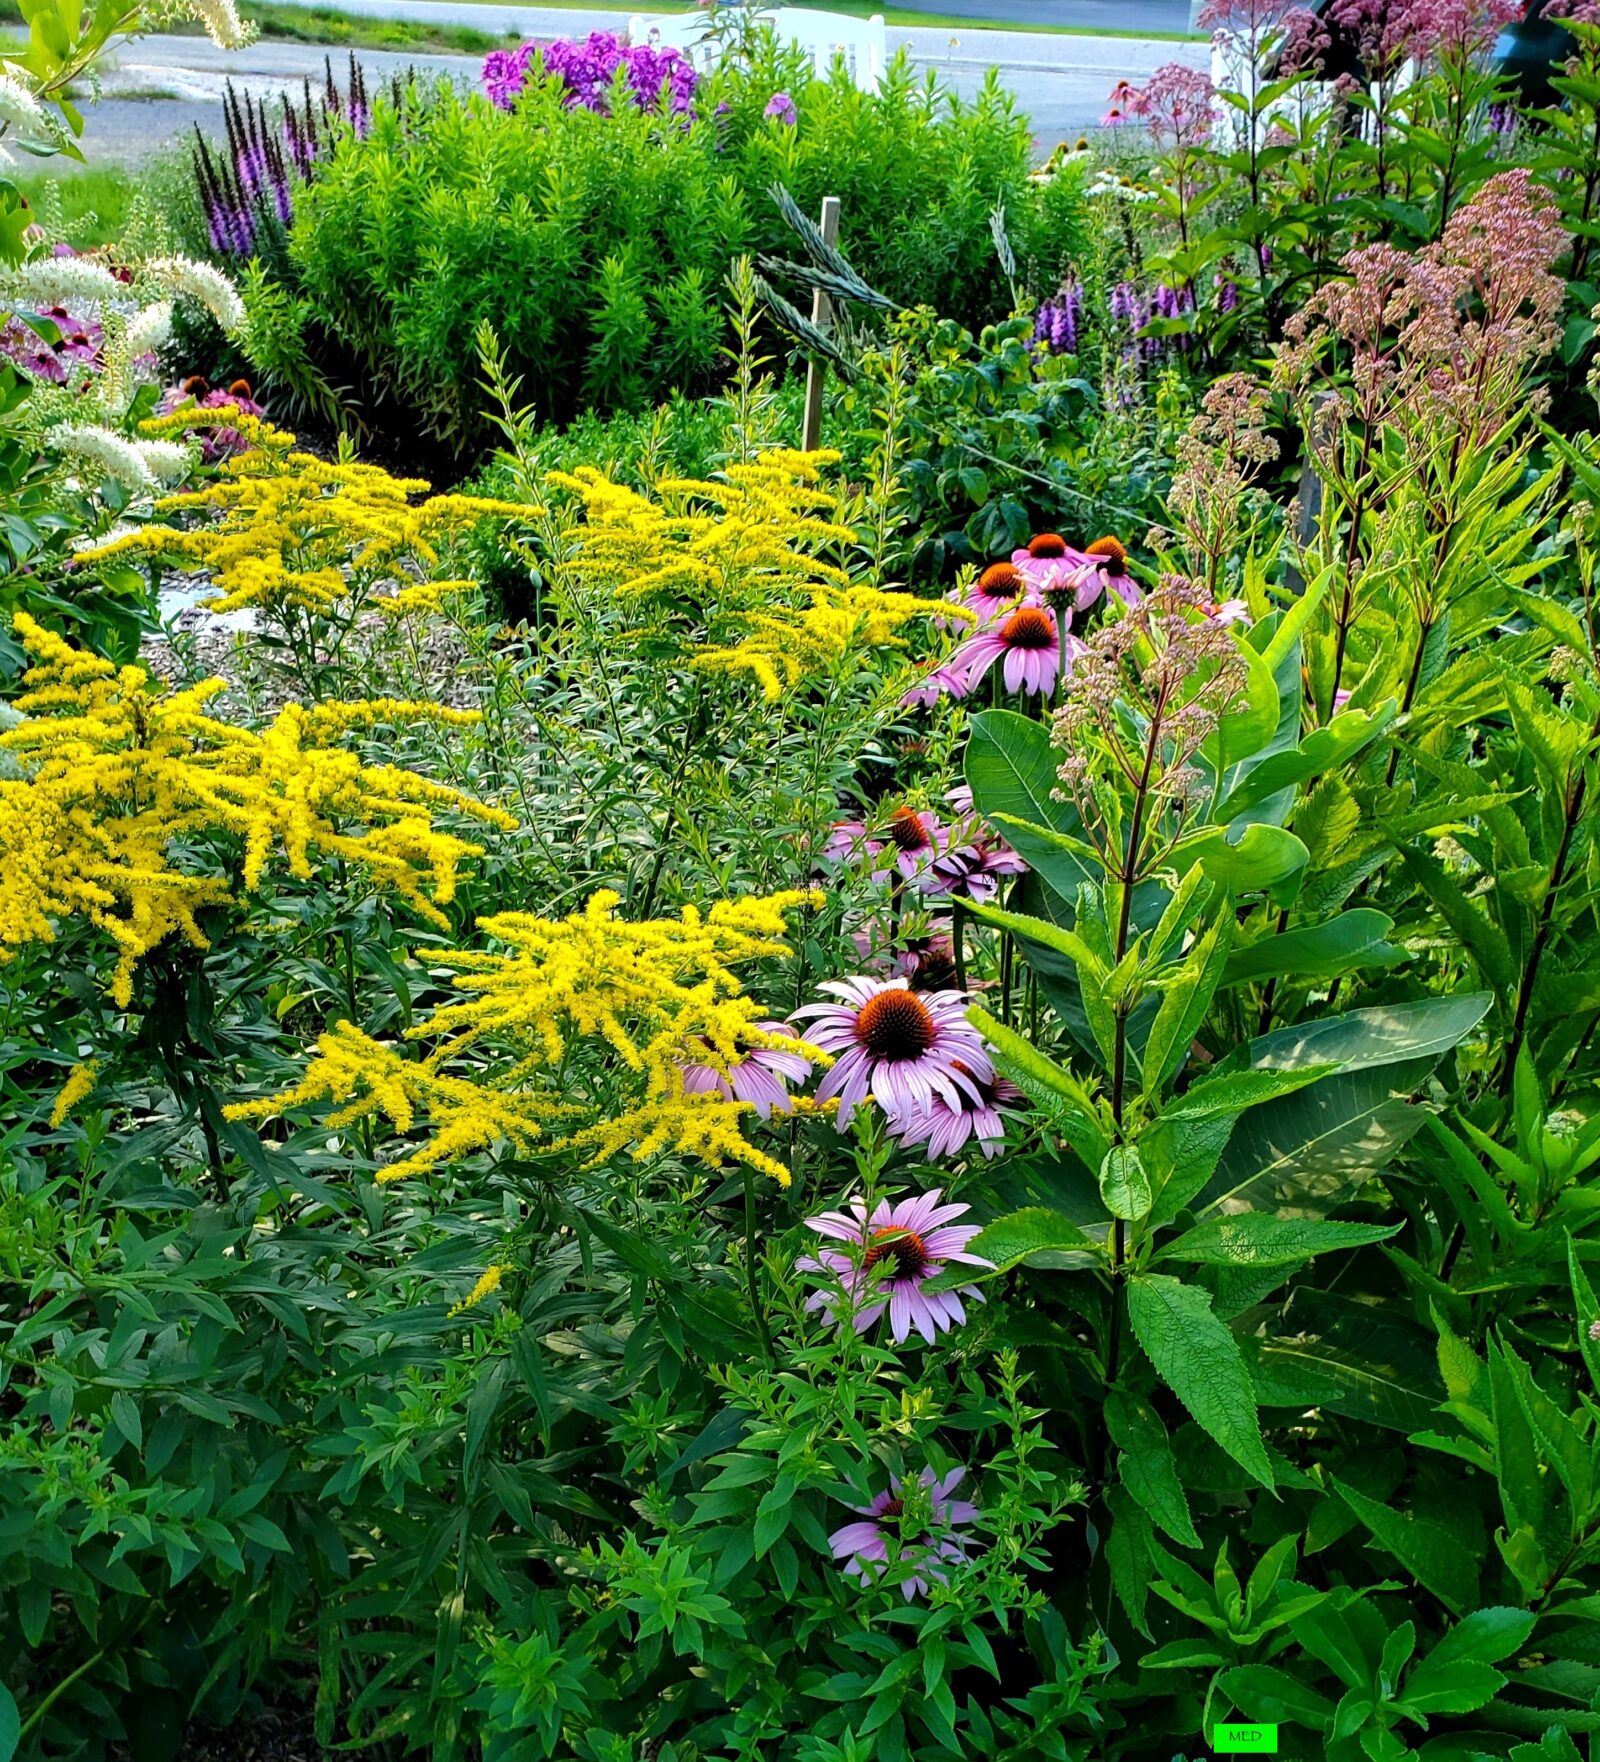 A lush green garden bursting with colorful flowers and plants.